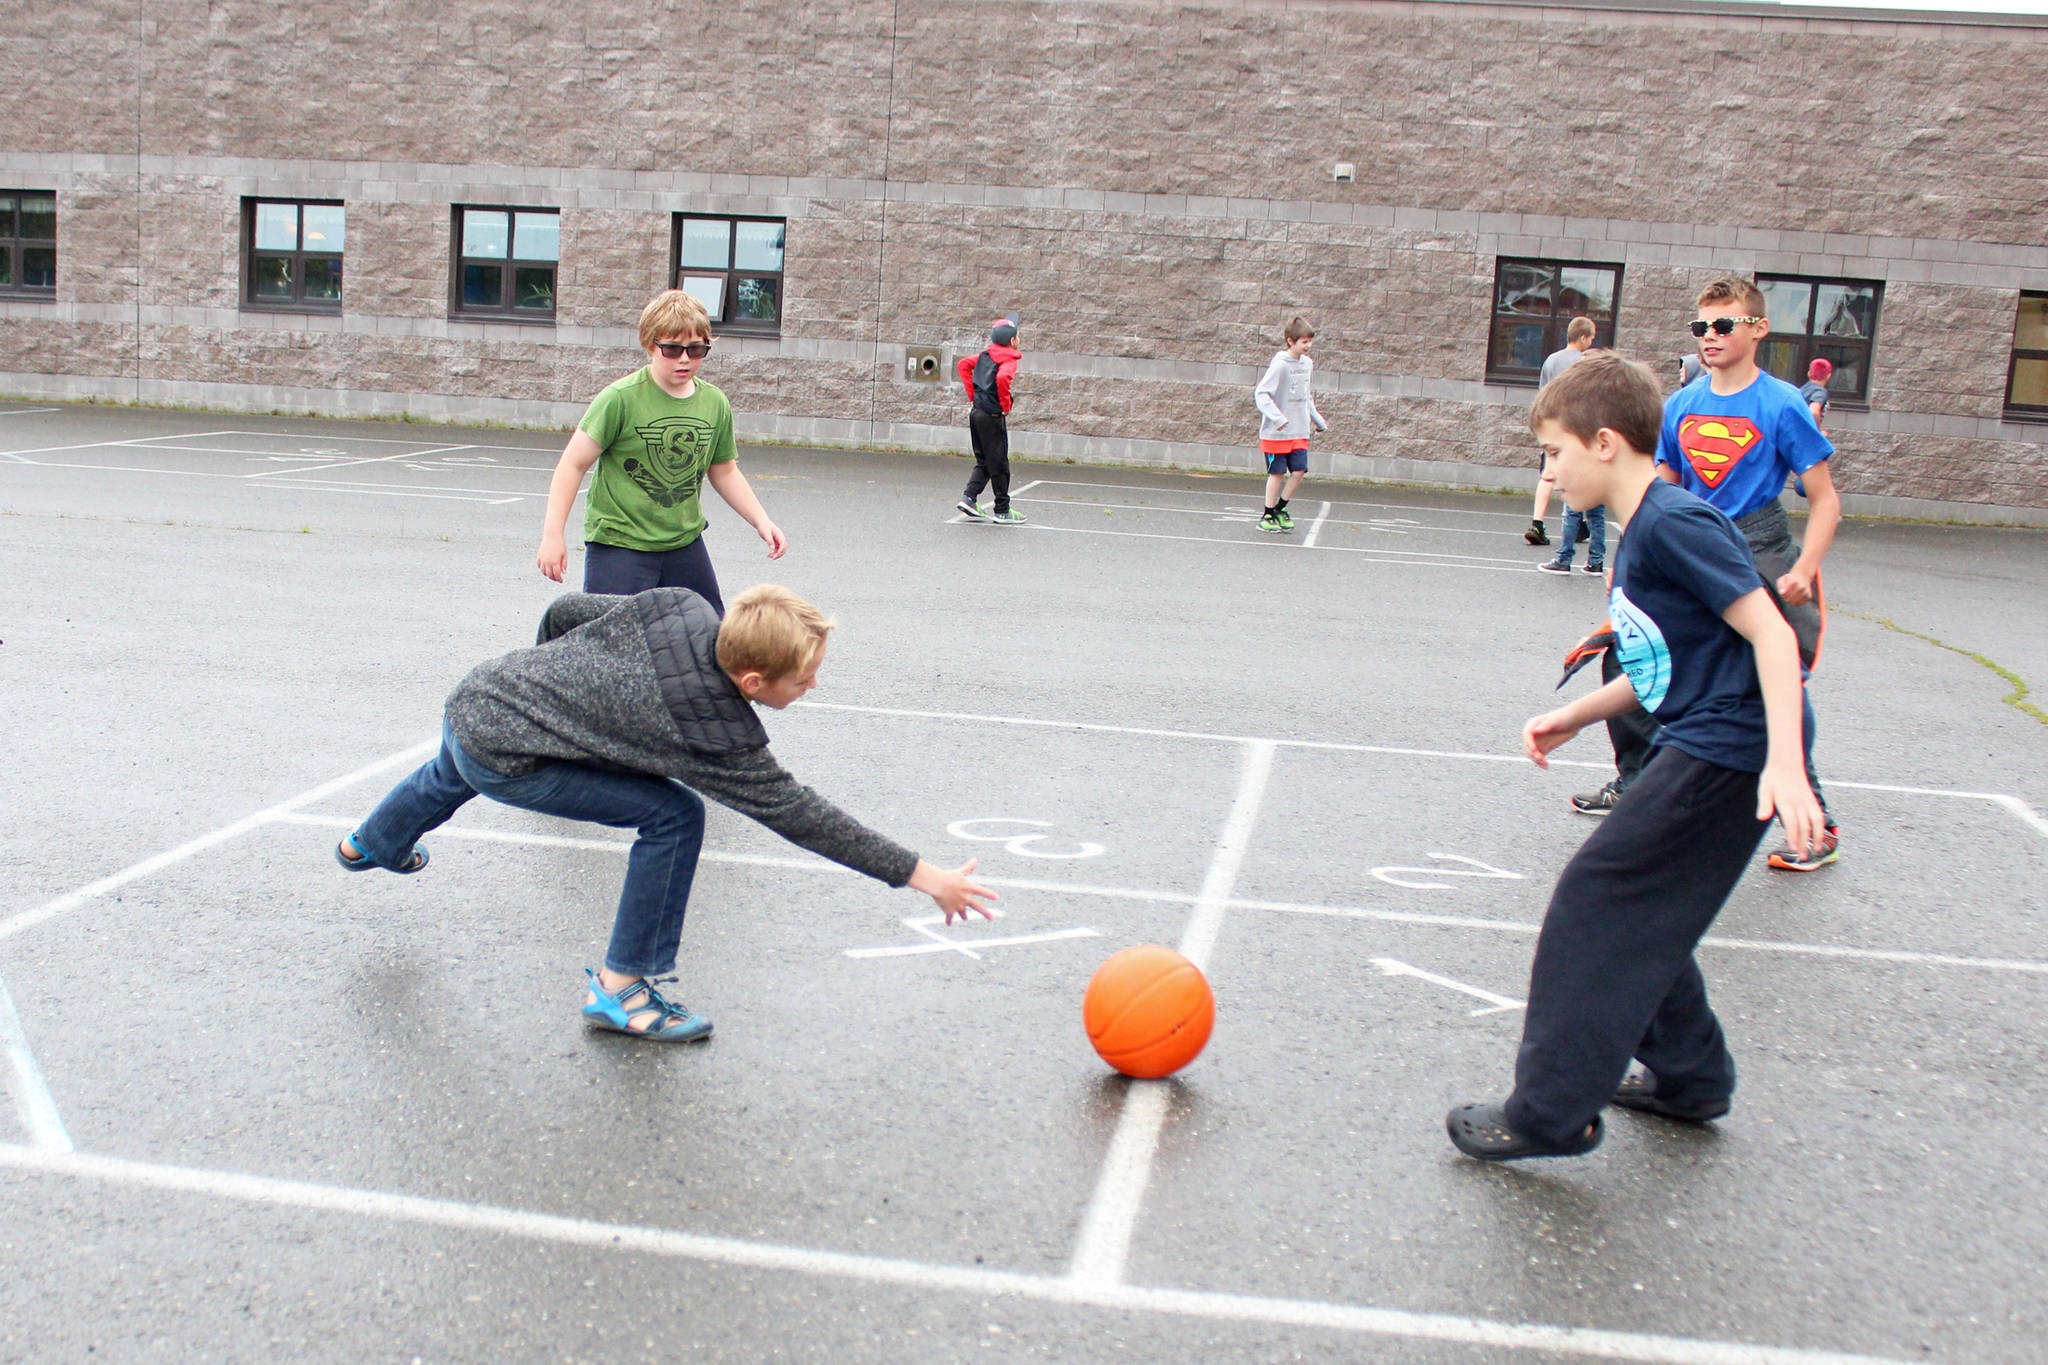 Jaxon Bourne, Sydney Phipps, Steel Seaton and Aiden Clark play a ball game in courtyard during recess on Tuesday, Aug. 18, 2018, the first day of school, at West Homer Elementary in Homer, Alaska. (Photo by Megan Pacer/Homer News)